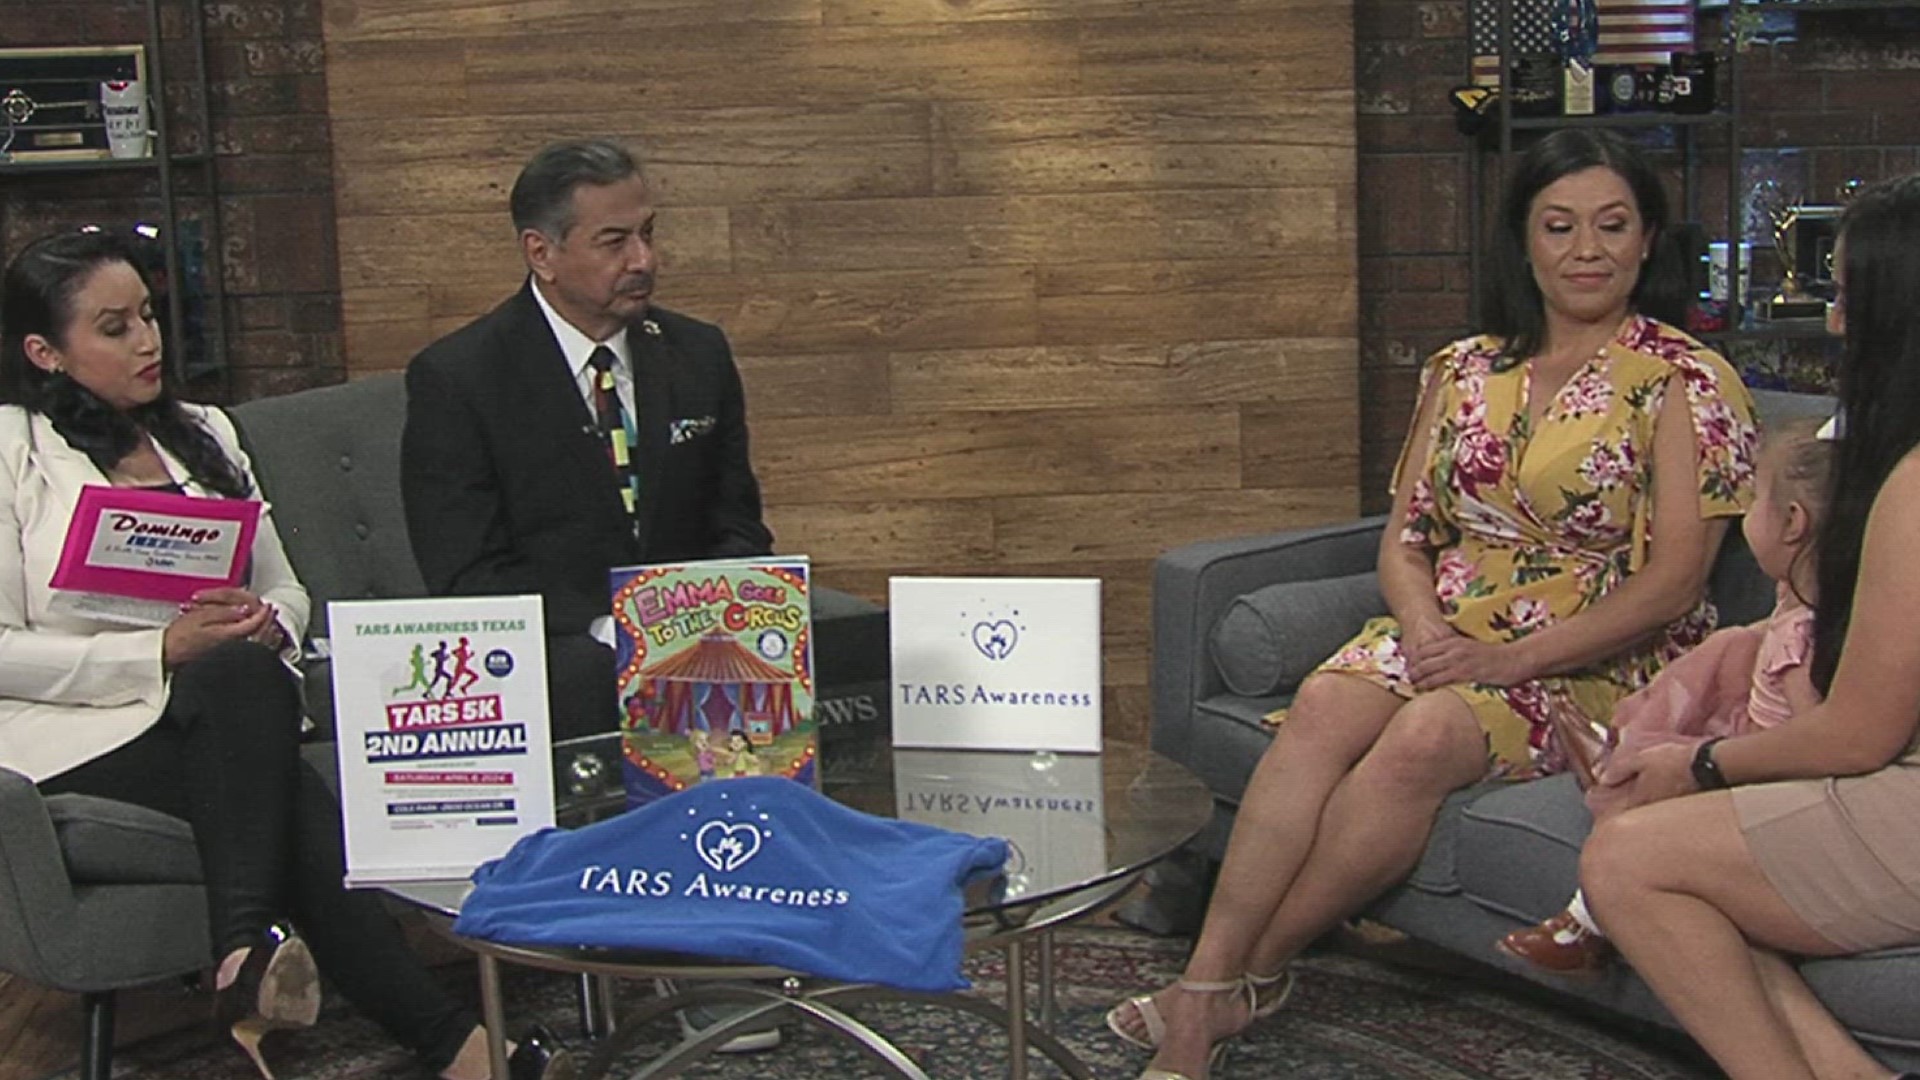 TARS Texas visited us on Domingo Live to talk about their first children's book and their upcoming TARS awareness 5K race.